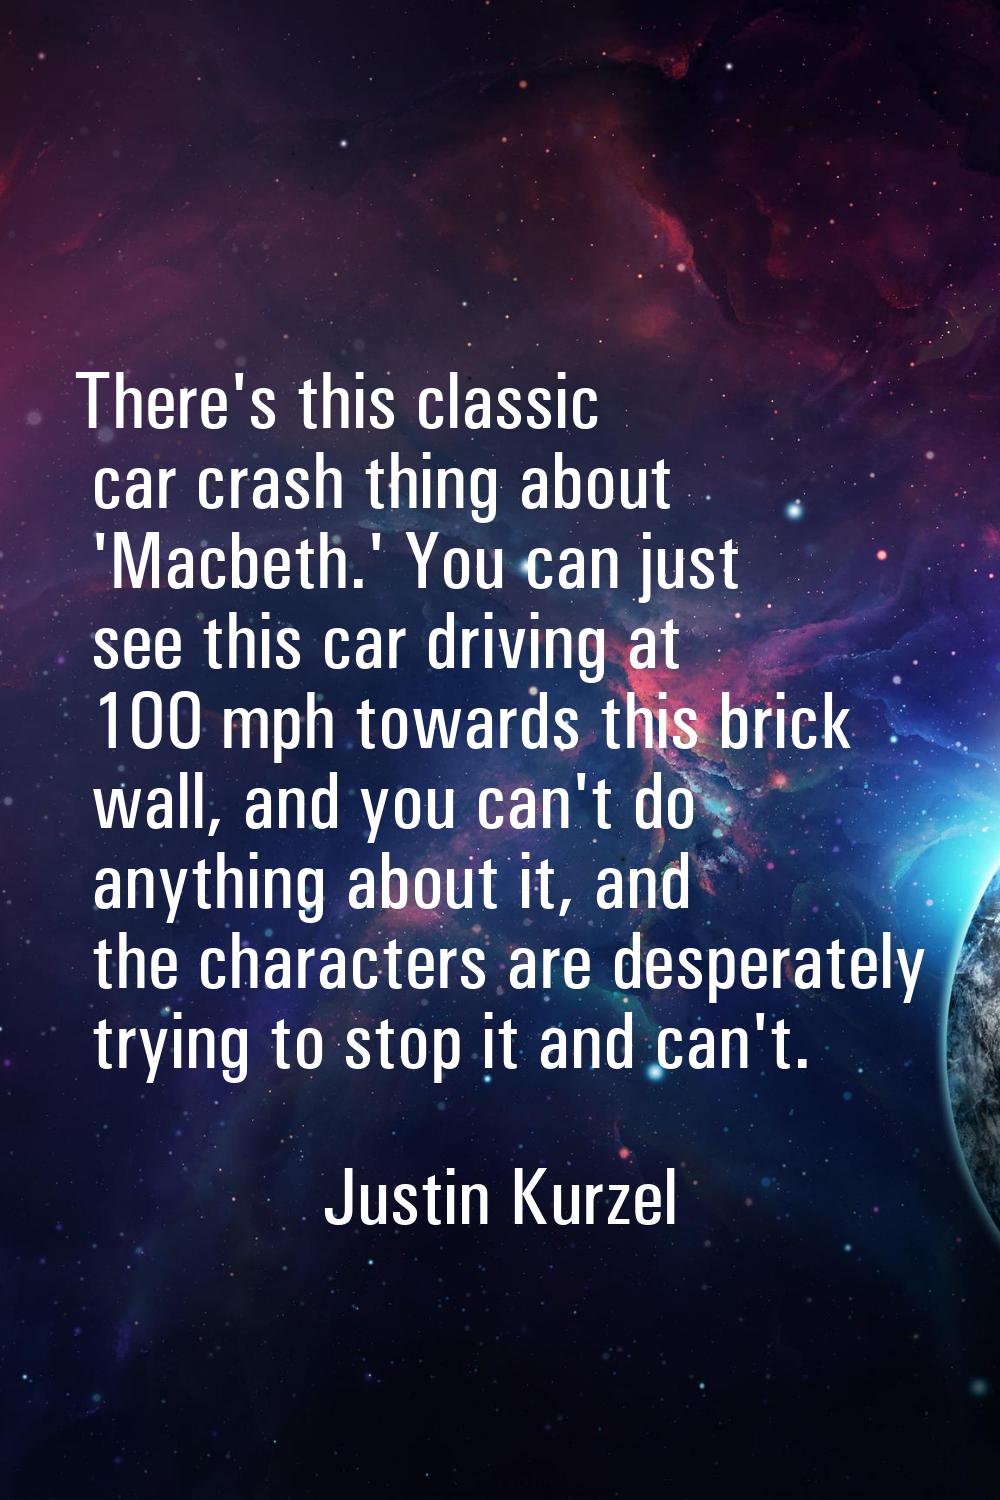 There's this classic car crash thing about 'Macbeth.' You can just see this car driving at 100 mph 